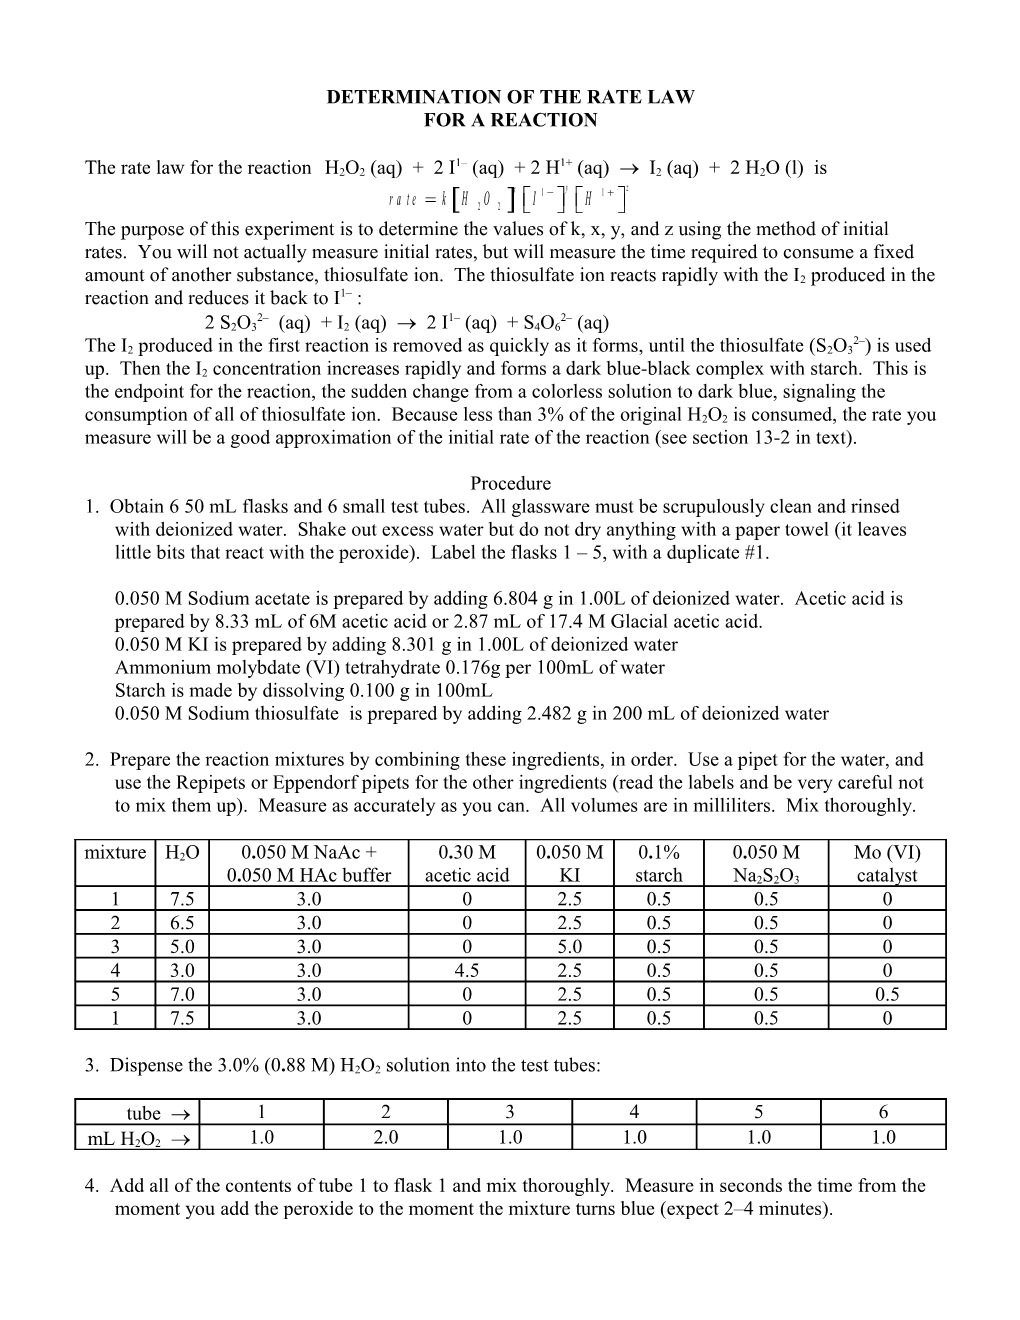 Determination of the Rate Law for a Reaction